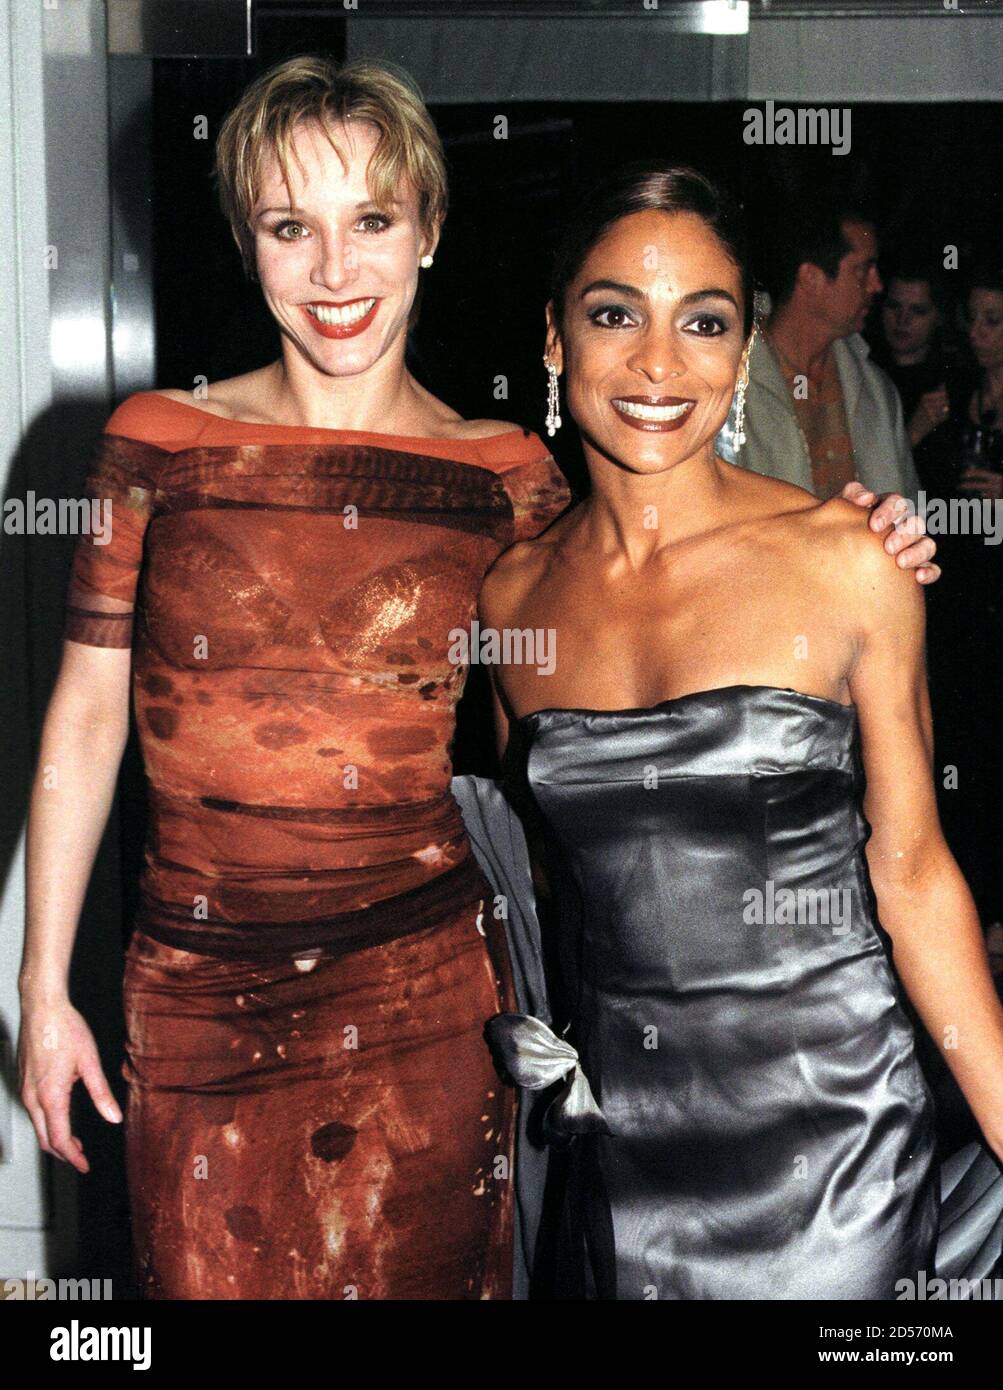 Actresses Charlotte d'Amboise (L) and Jasmine Guy, stars of the musical play 'Chicago' pose at the party following the premiere performance of the play 'Chicago' as it opens its Los Angles run May 6 at the Ahmanson Theater in Los Angeles. Stock Photo